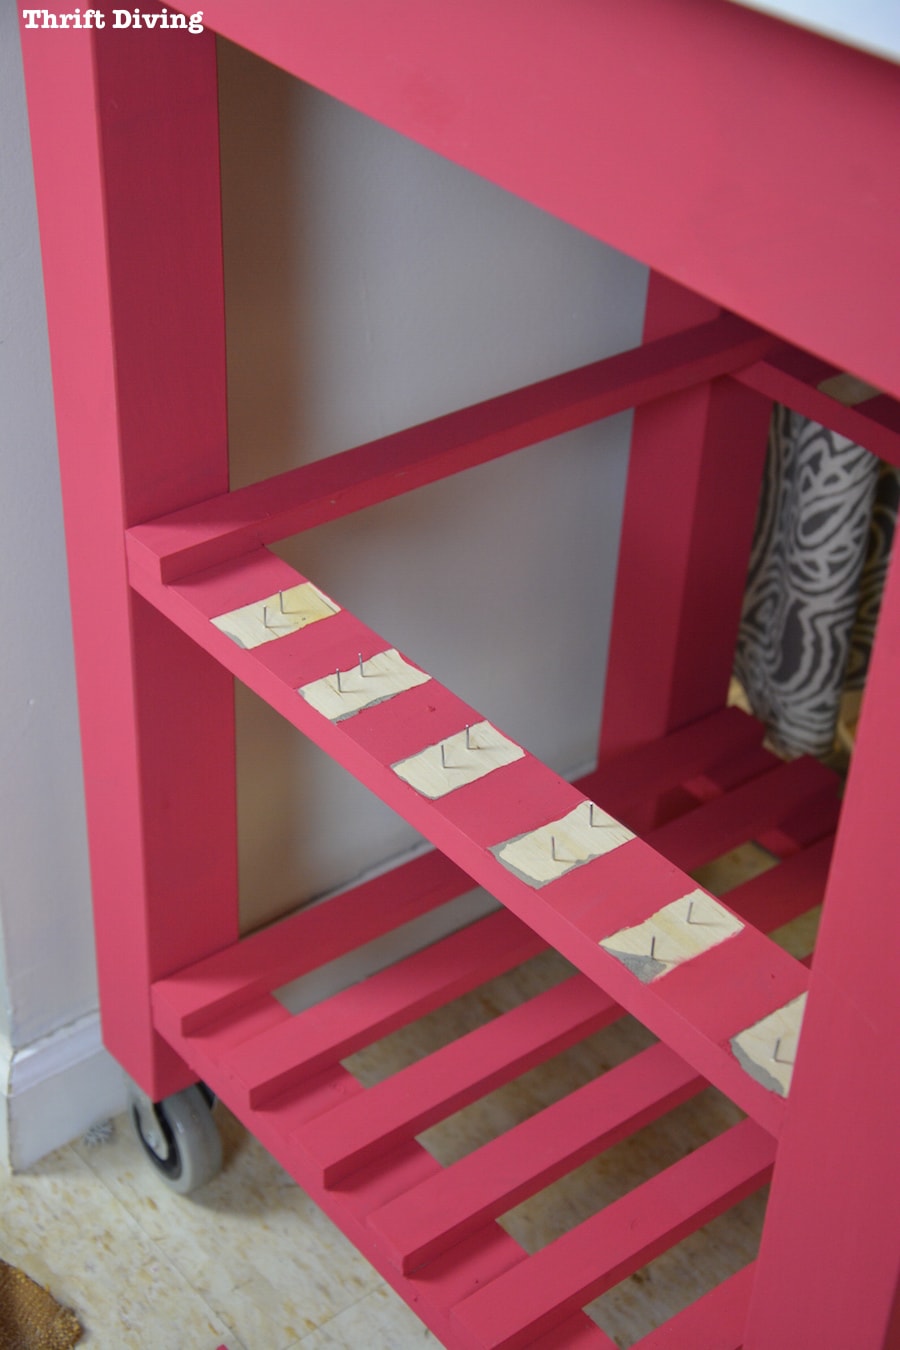 Repurposed IKEA Kitchen Cart makeover - The center shelf slats were removed to make room for hanging file folders.